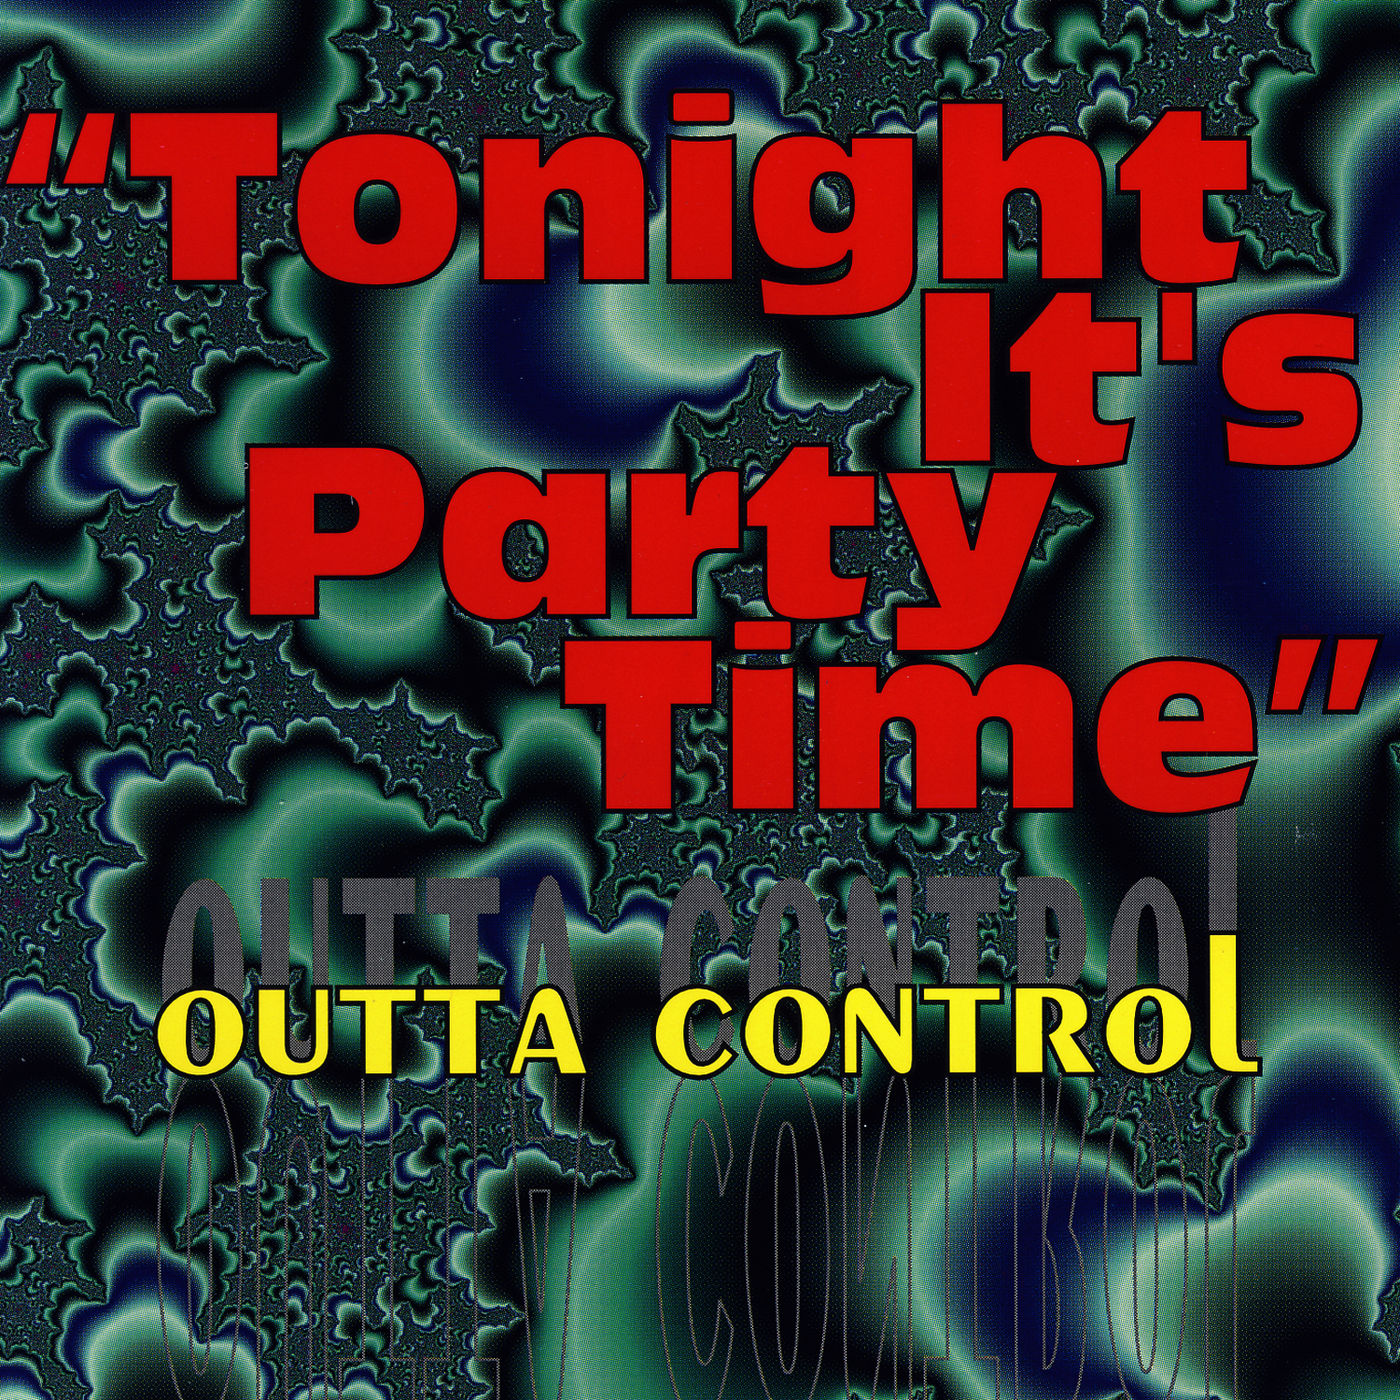 Outta Control - Tonight It's Party Time (Web Single) (1995) FLAC